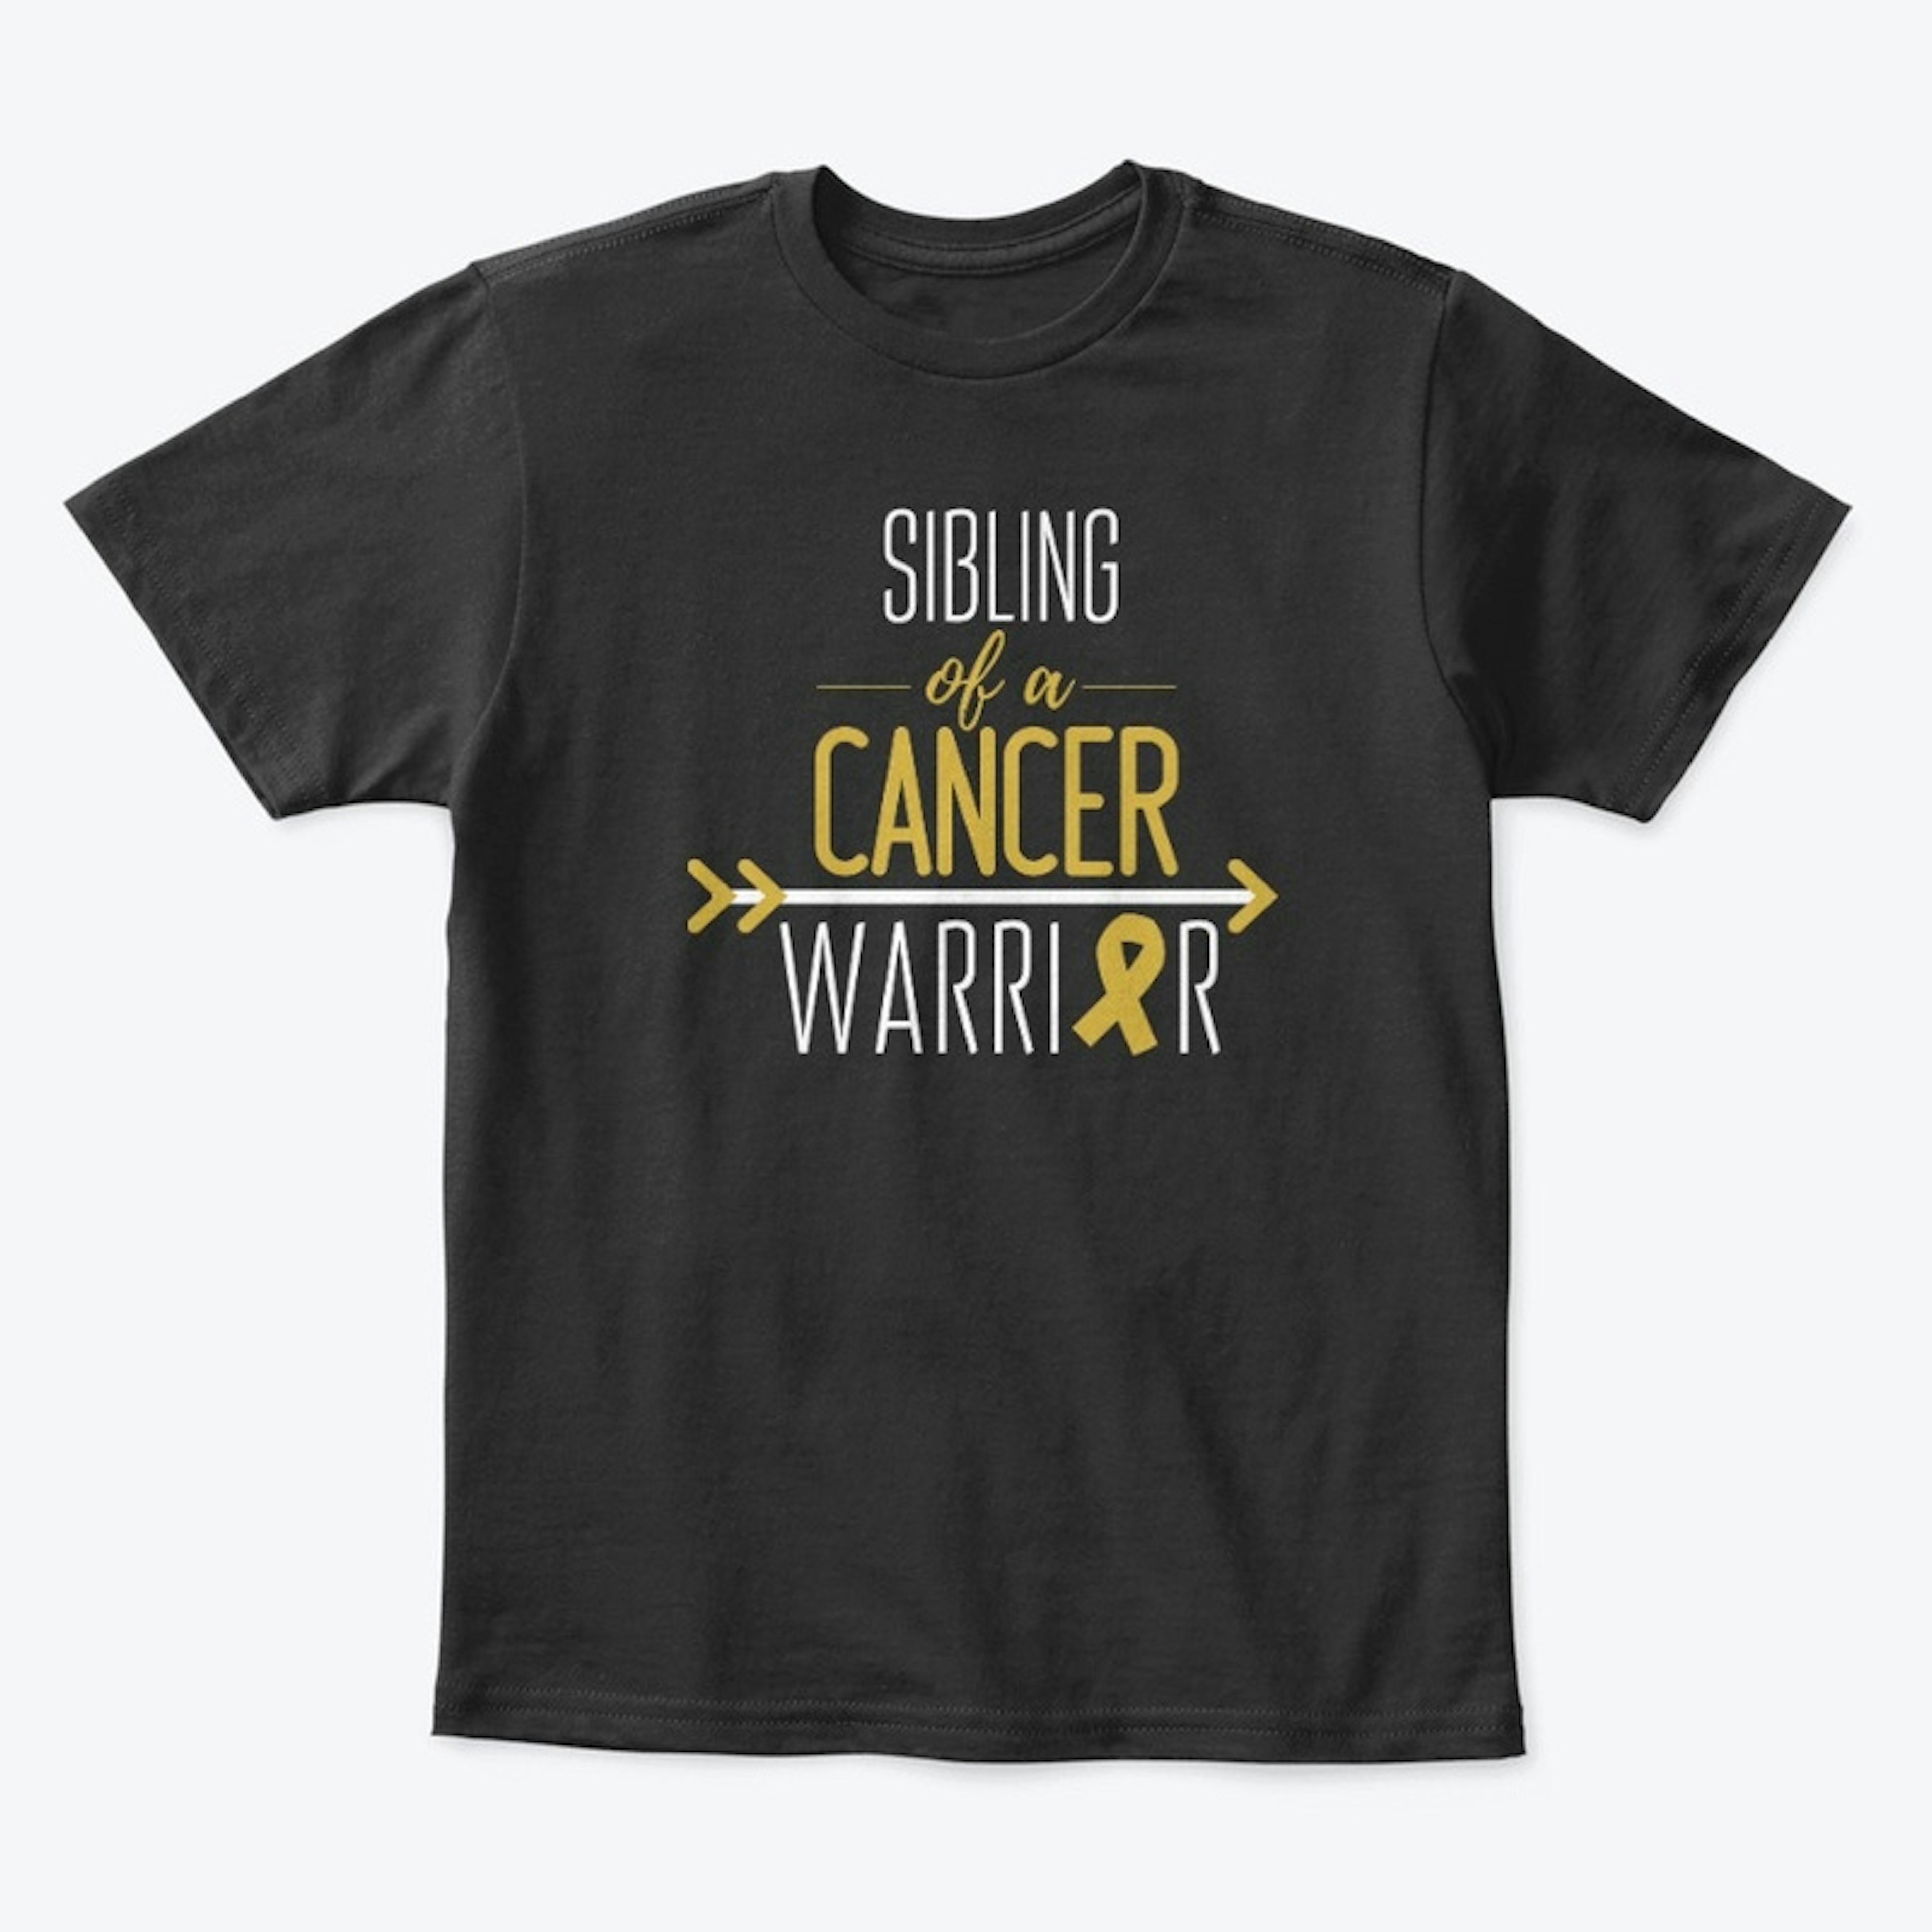 Sibling (Child Size) of a Cancer Warrior